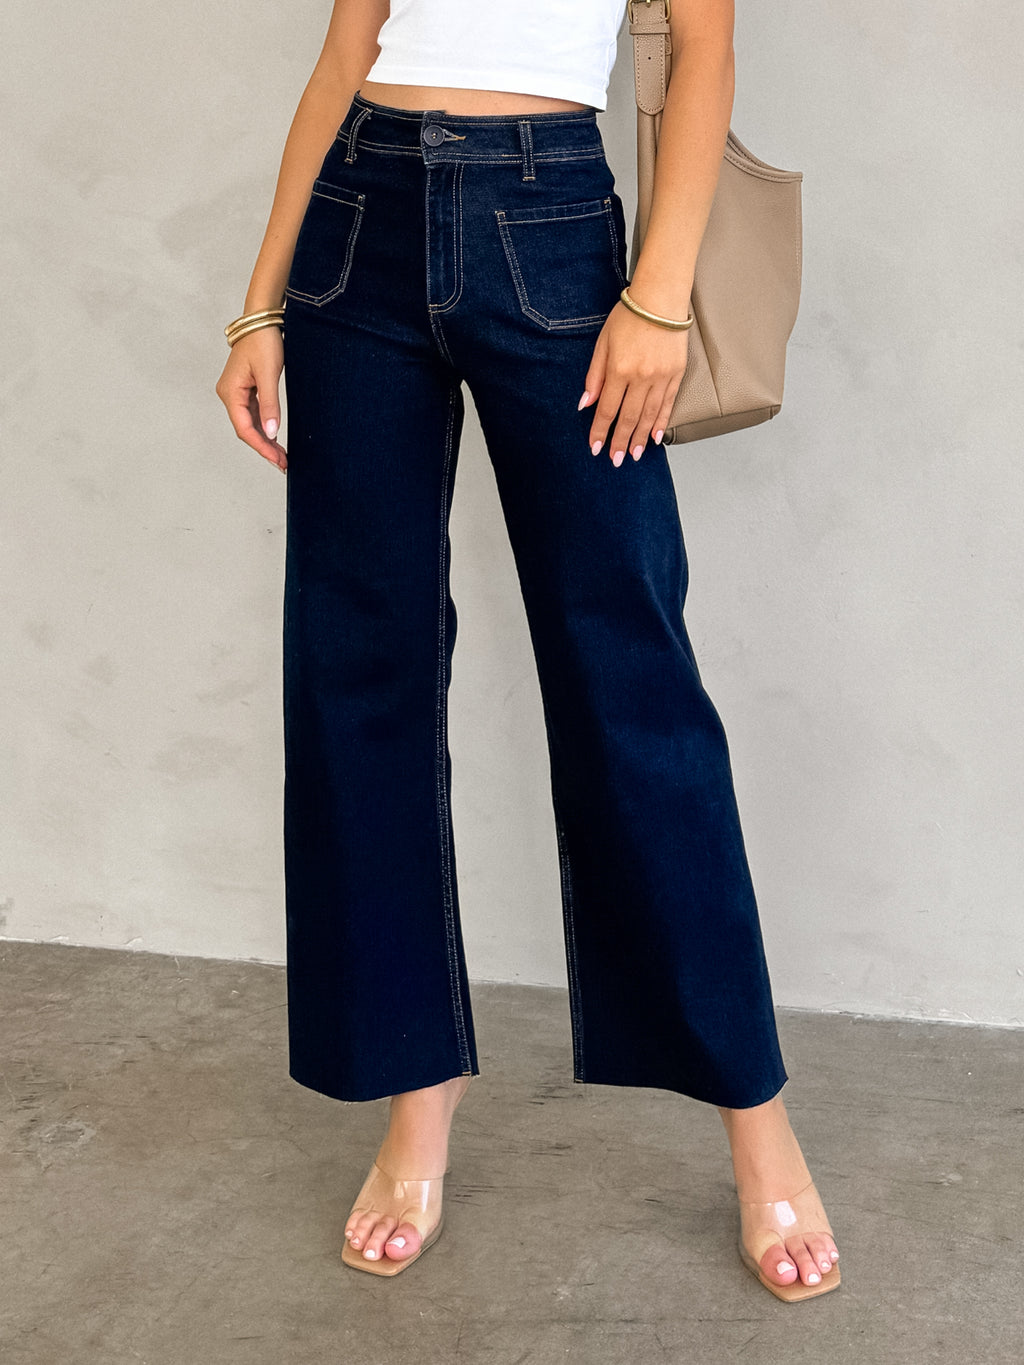 See You Again Wide Leg Jeans in Indigo - Stitch And Feather